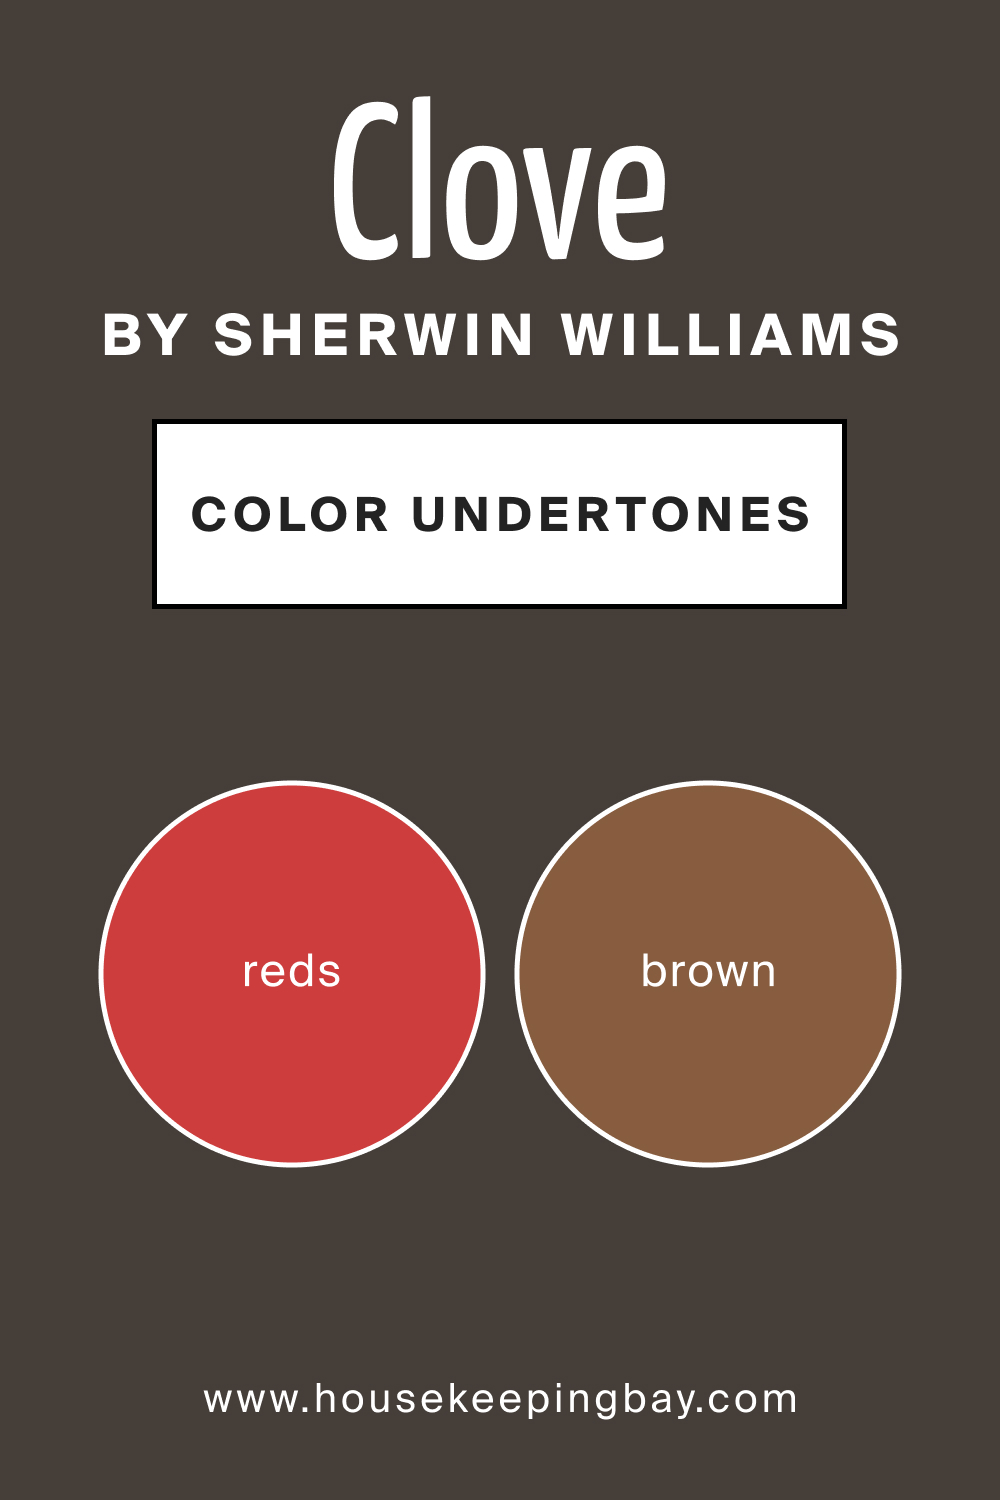 SW 9605 Clove by Sherwin Williams Color Undertone